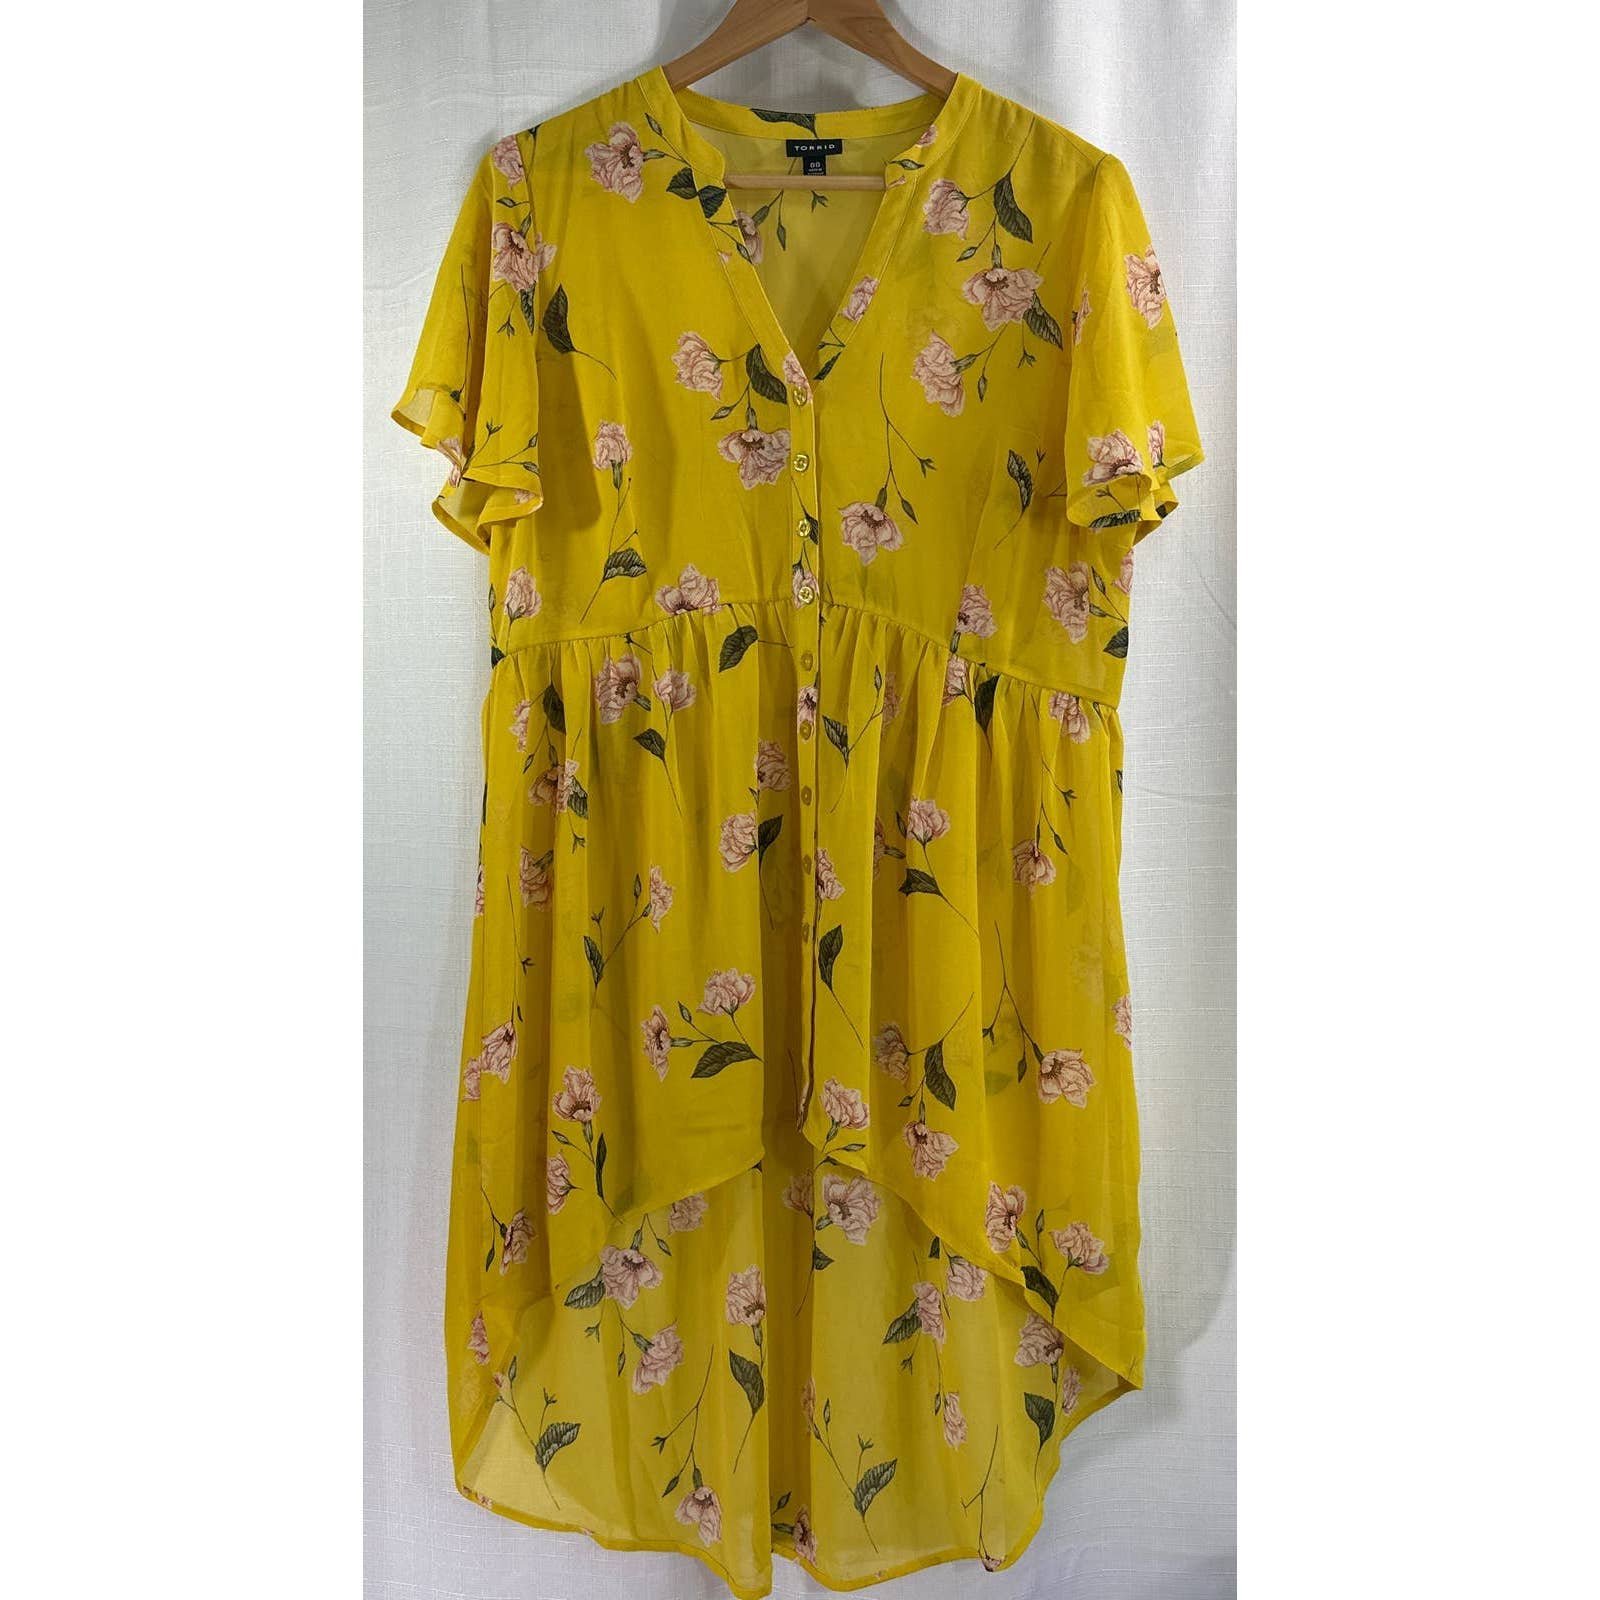 Latest  Torrid Yellow Floral Button Semi Sheer Chiffon Babydoll High Low Tunic Top 0X K6BoDxkaM just for you